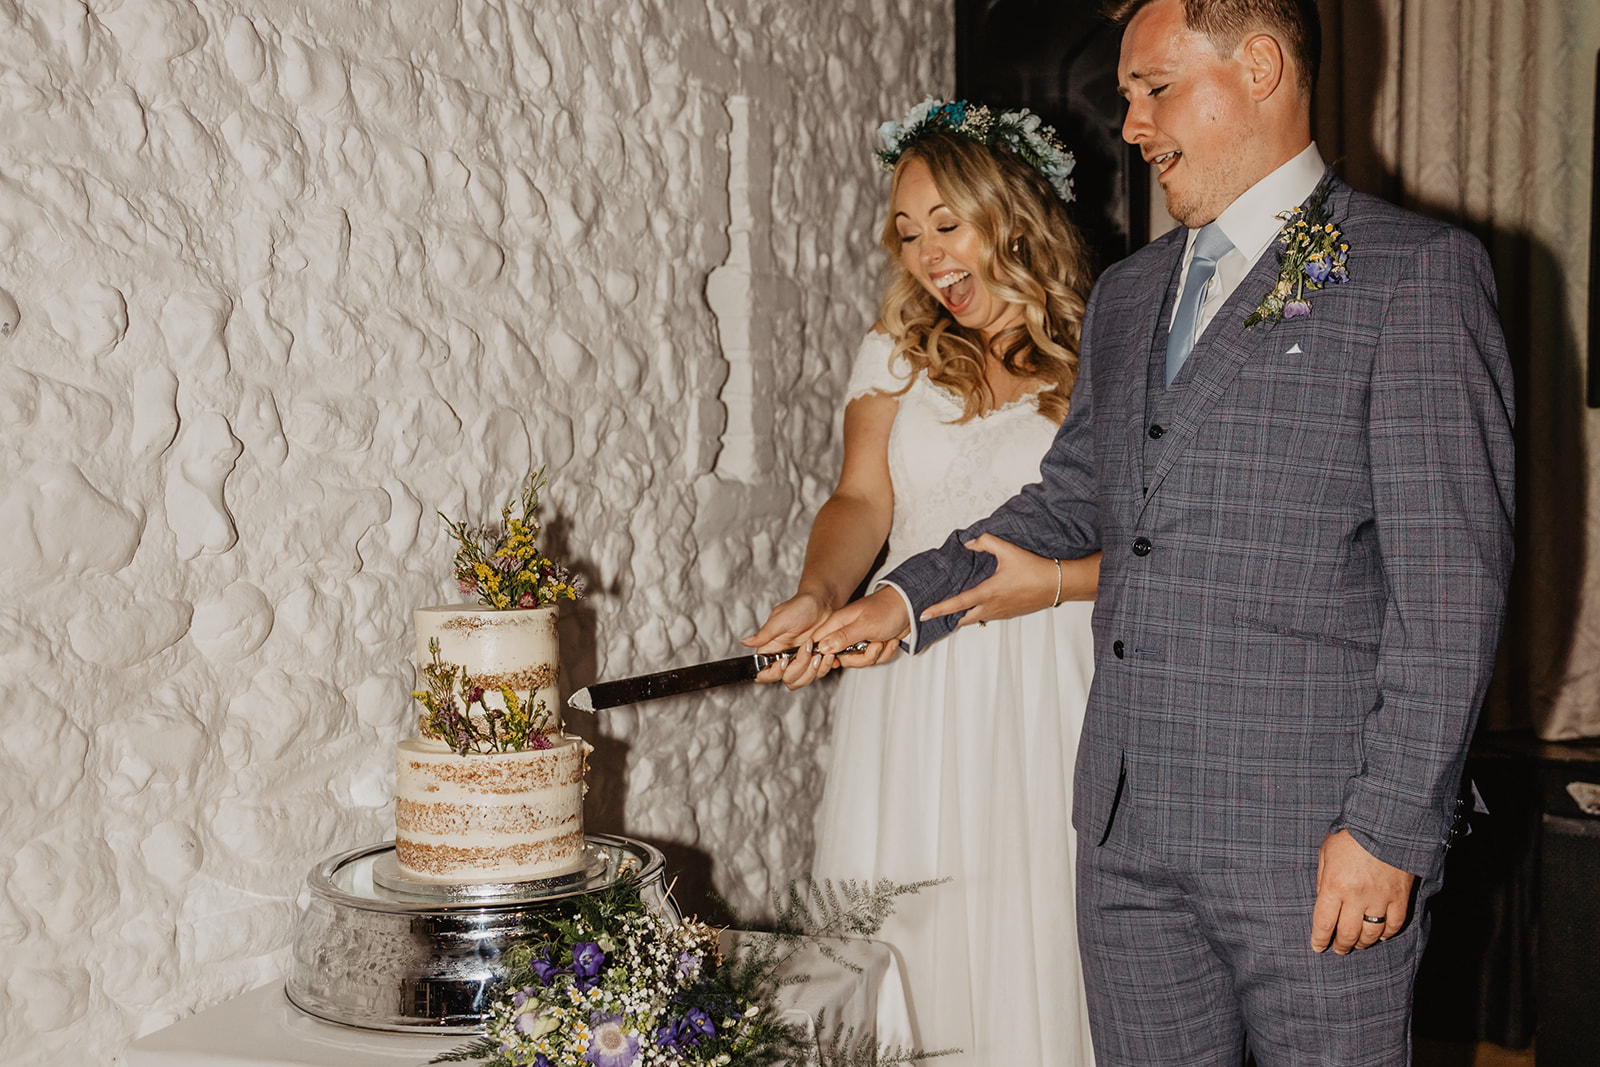 Bride and groom cutting their cake at Field Place Wedding Worthing, Sussex. By OliveJoy Photography.